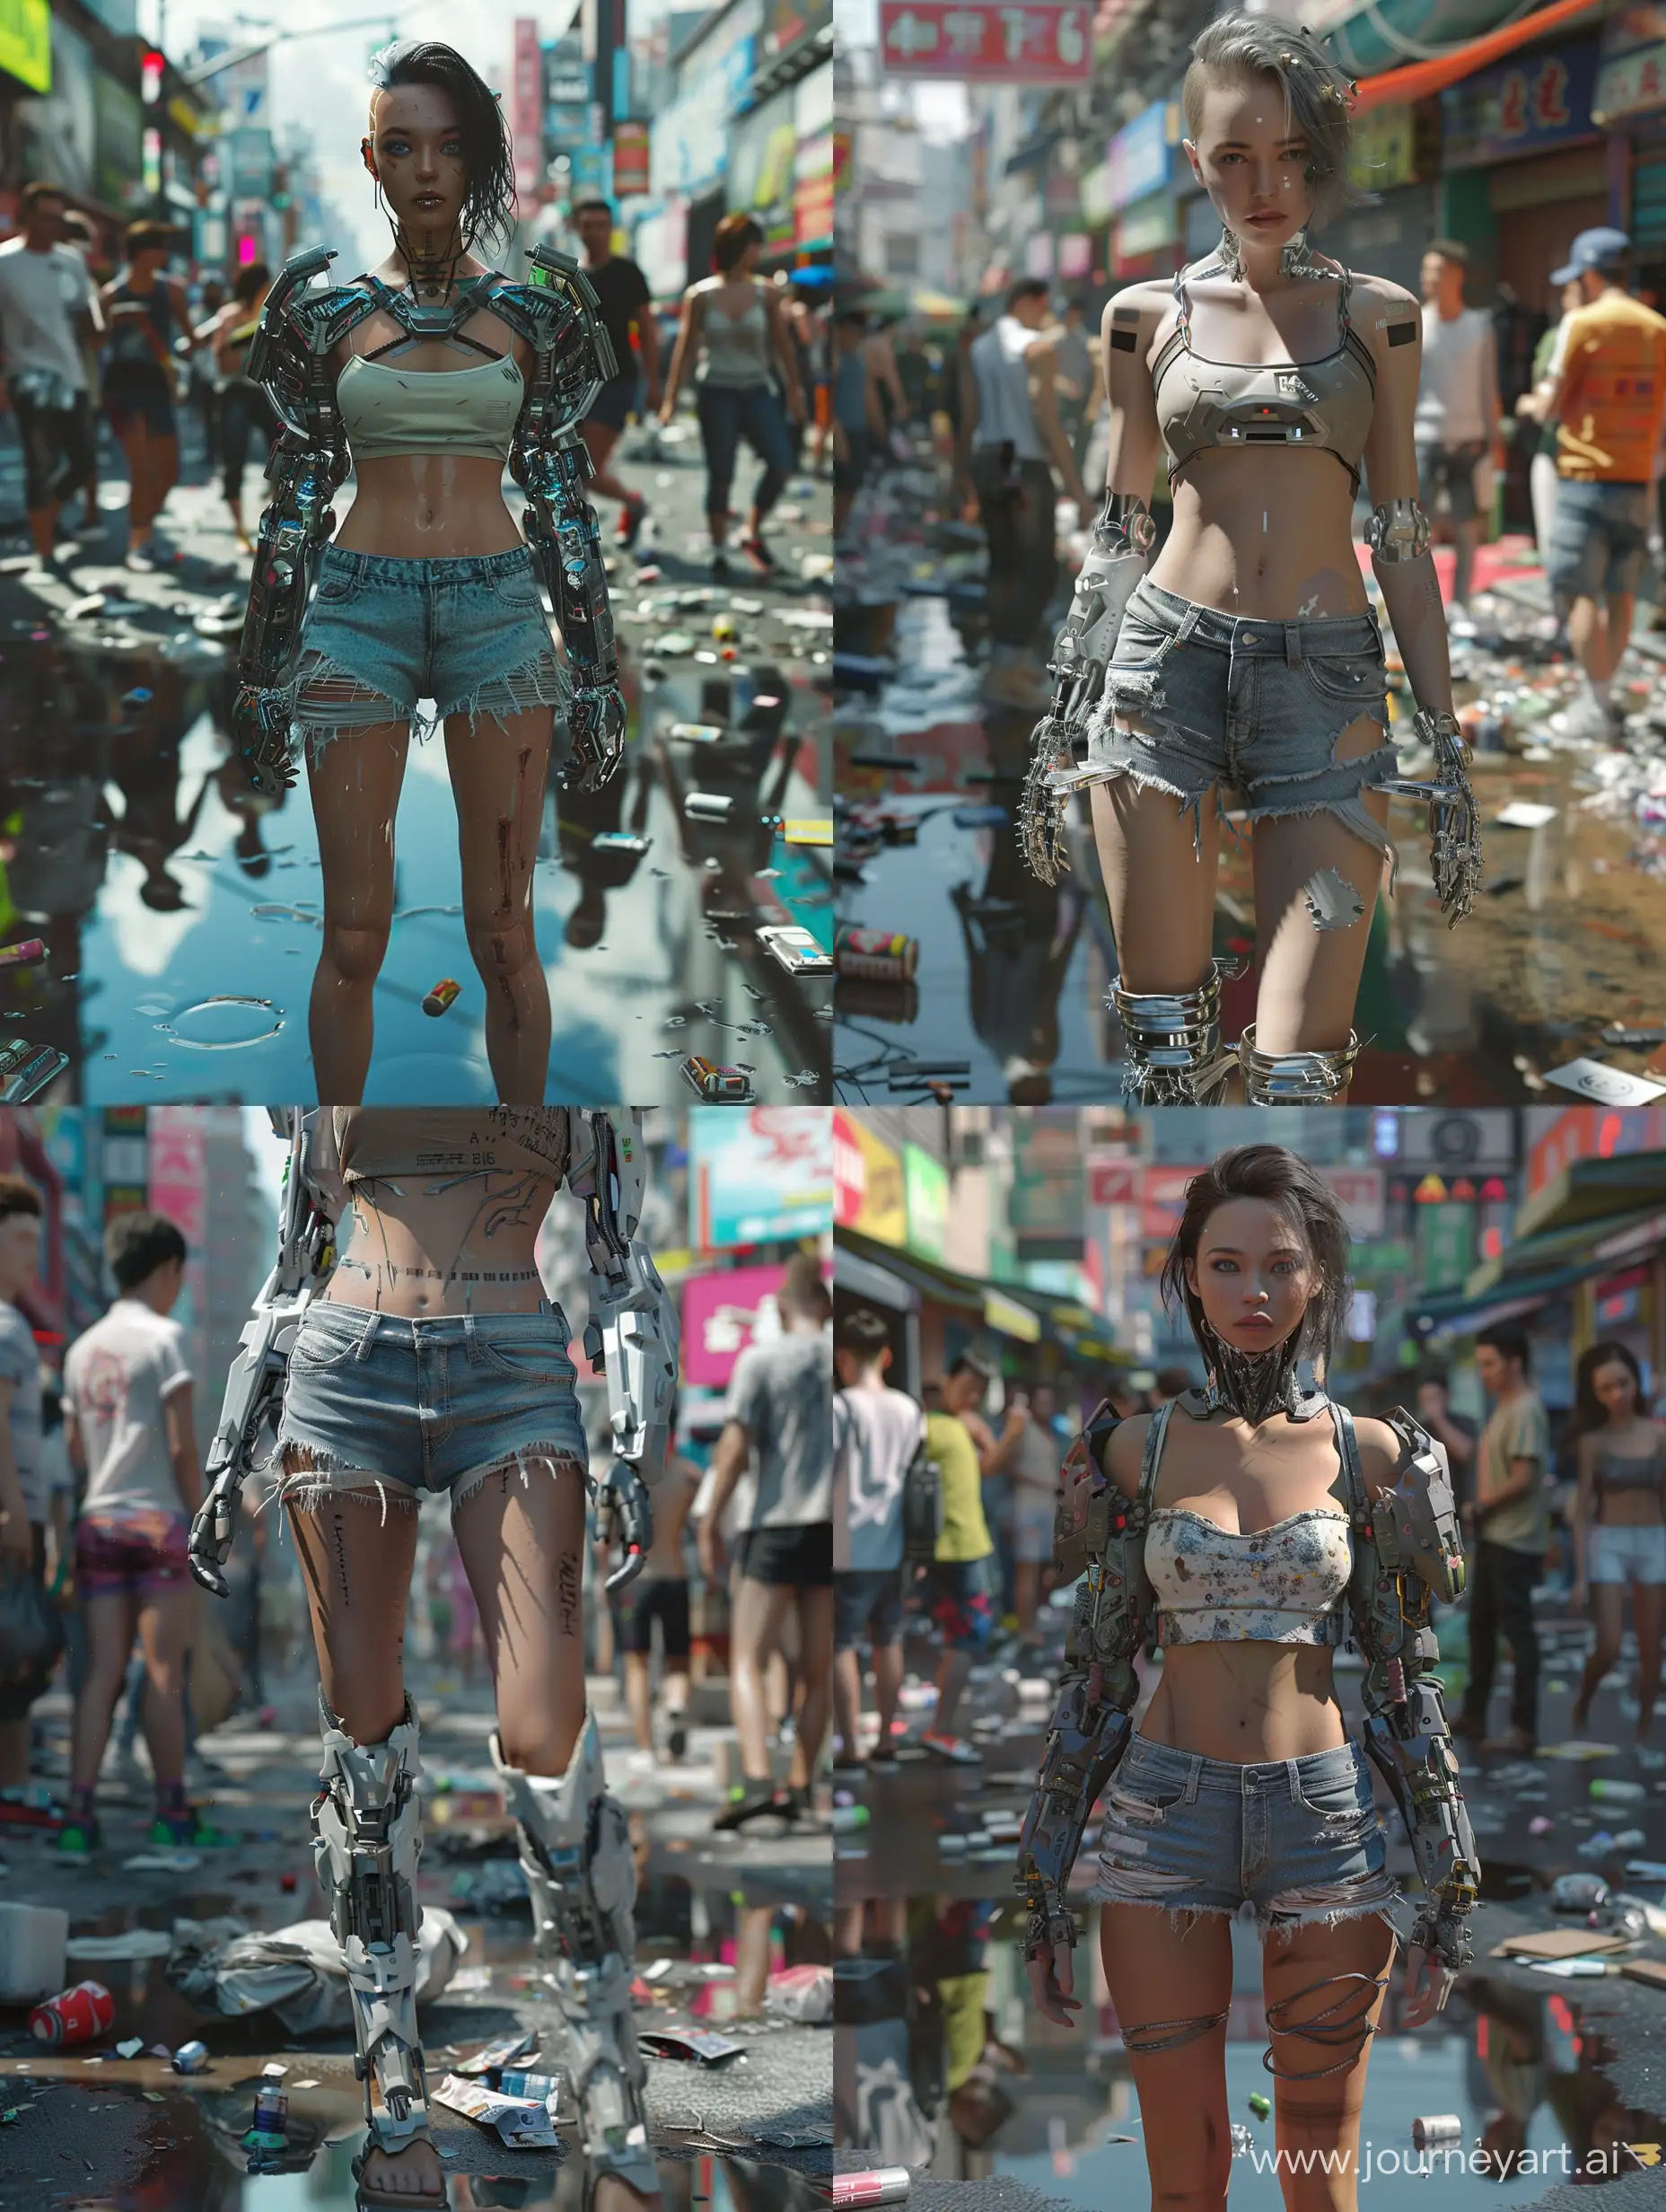 Cyberpunk-Female-in-HighTech-Cityscape-Amidst-Disarrayed-Crowds